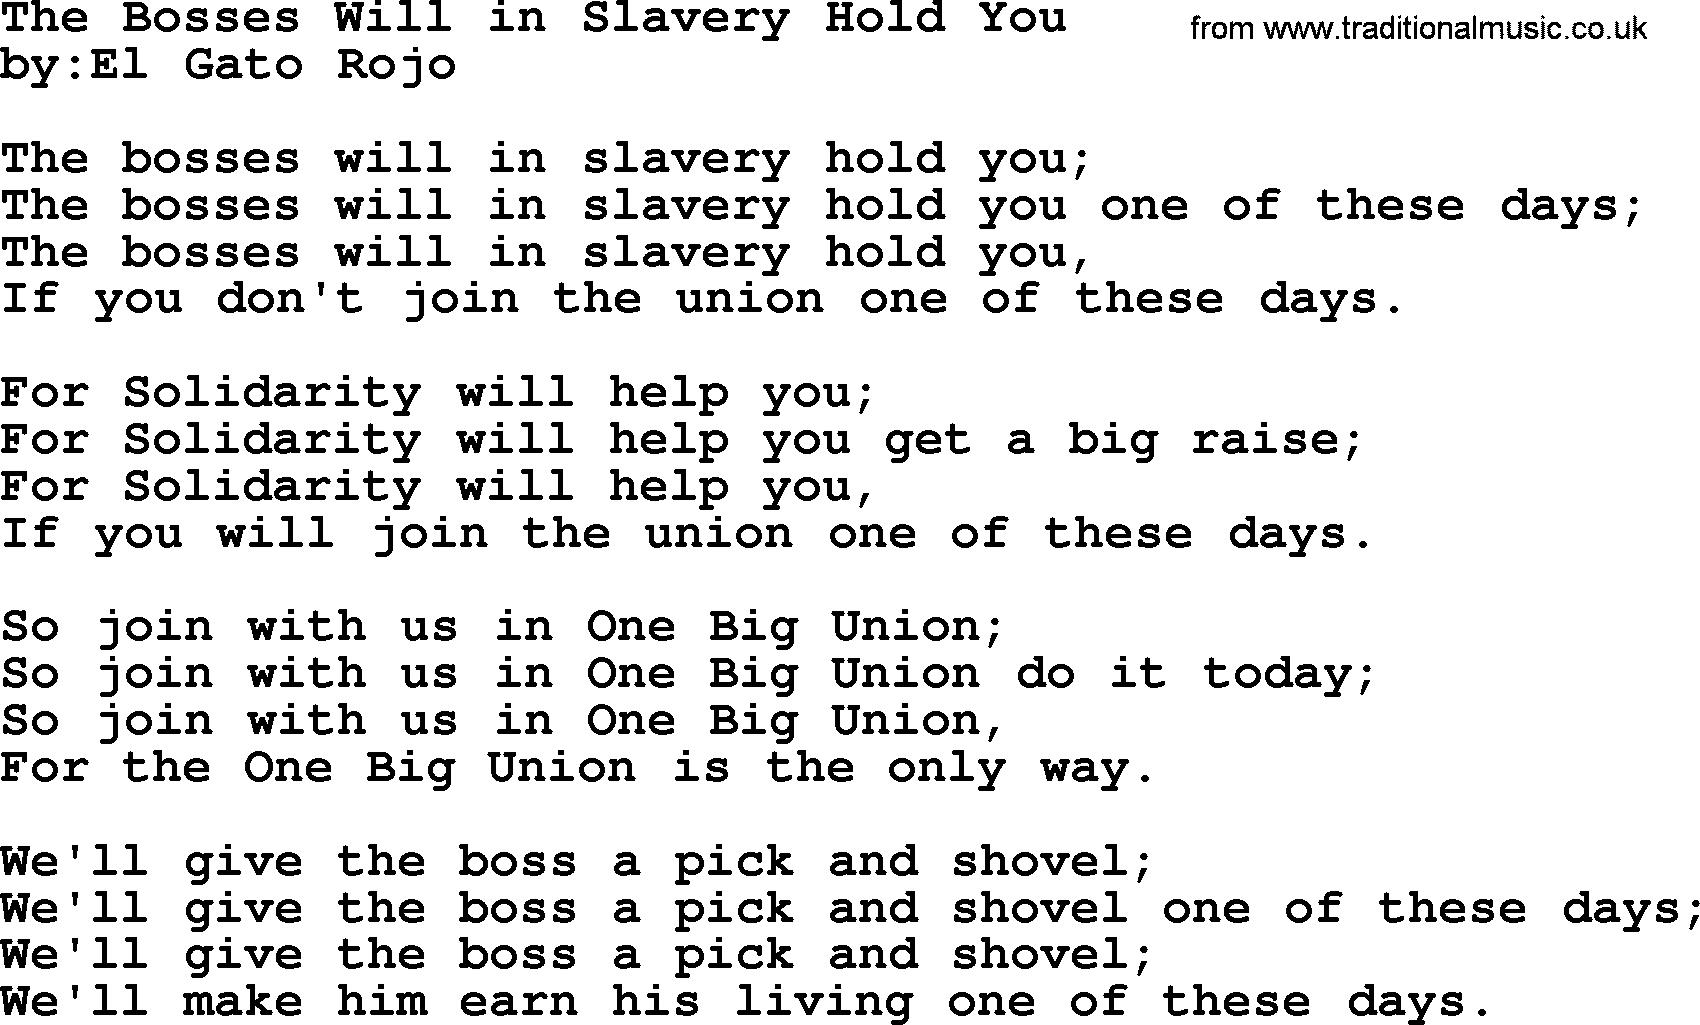 Political, Solidarity, Workers or Union song: The Bosses Will In Slavery Hold You, lyrics